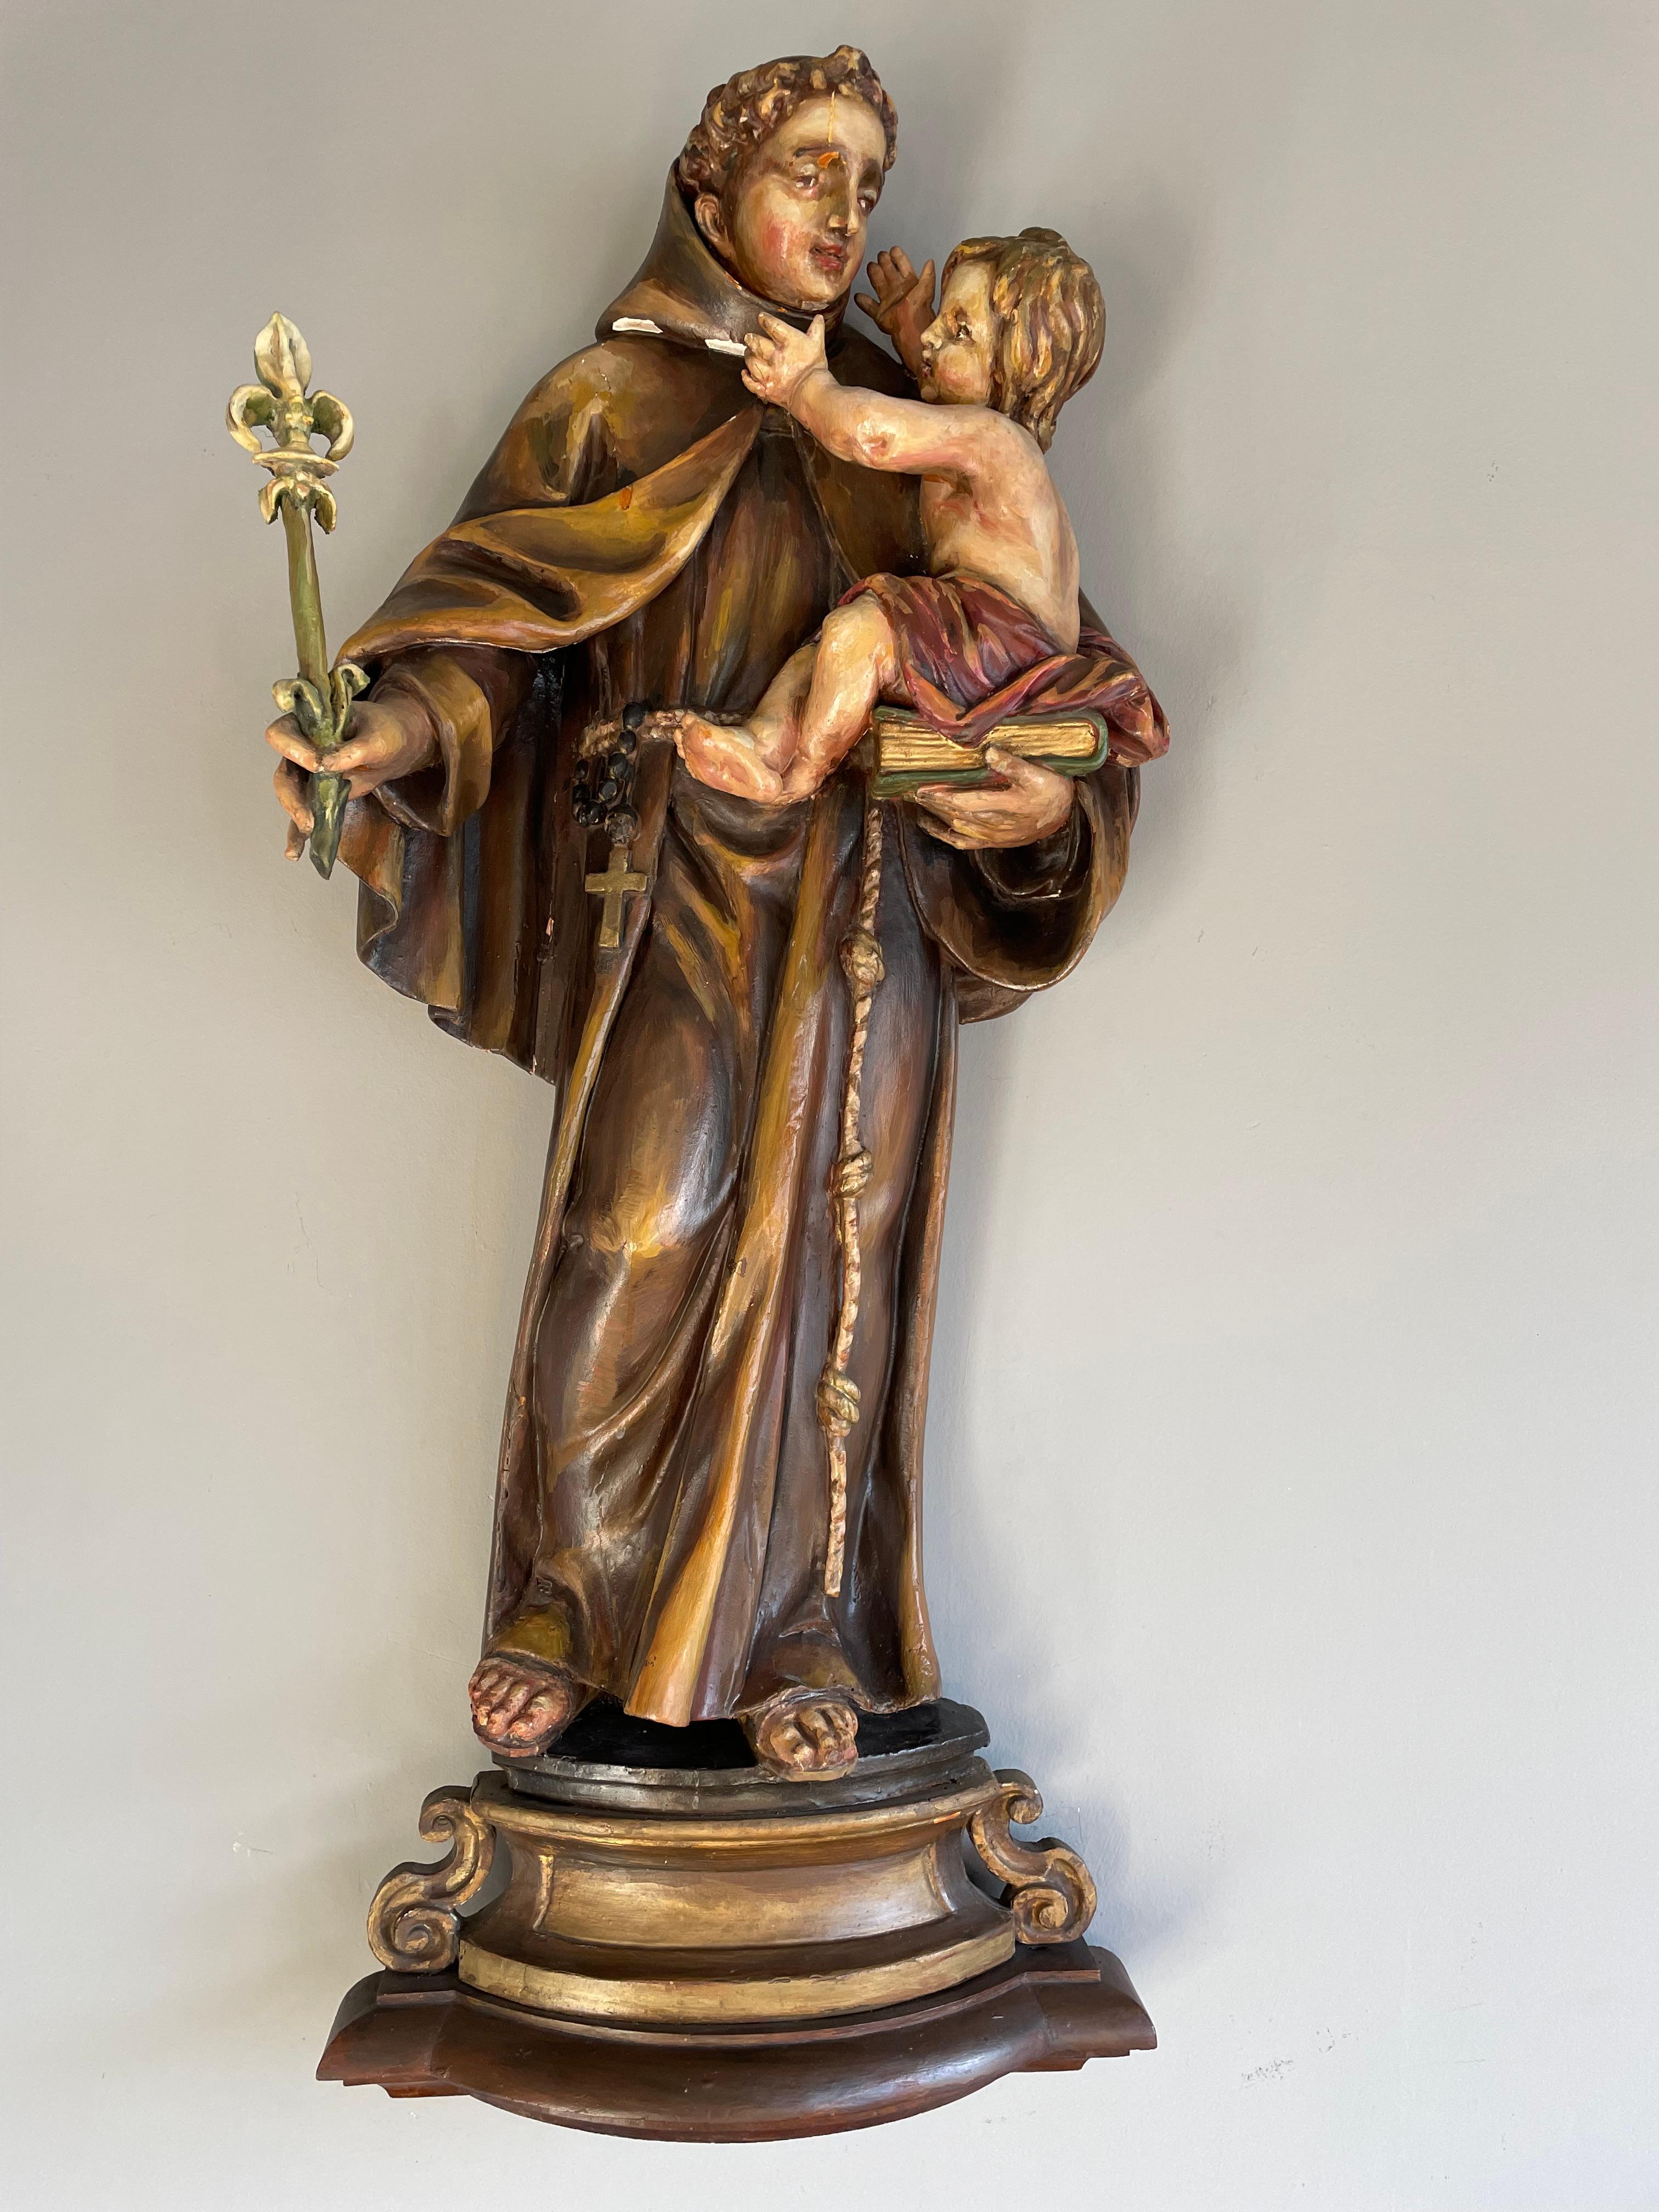 Rare and wonderful Saint Anthony church sculpture, European 17th century Baroque.

This rare and sizable wall statuette of Franciscan Saint Anthony is another one of our recent great finds. This wonderful church relic was hand-carved out of wood and